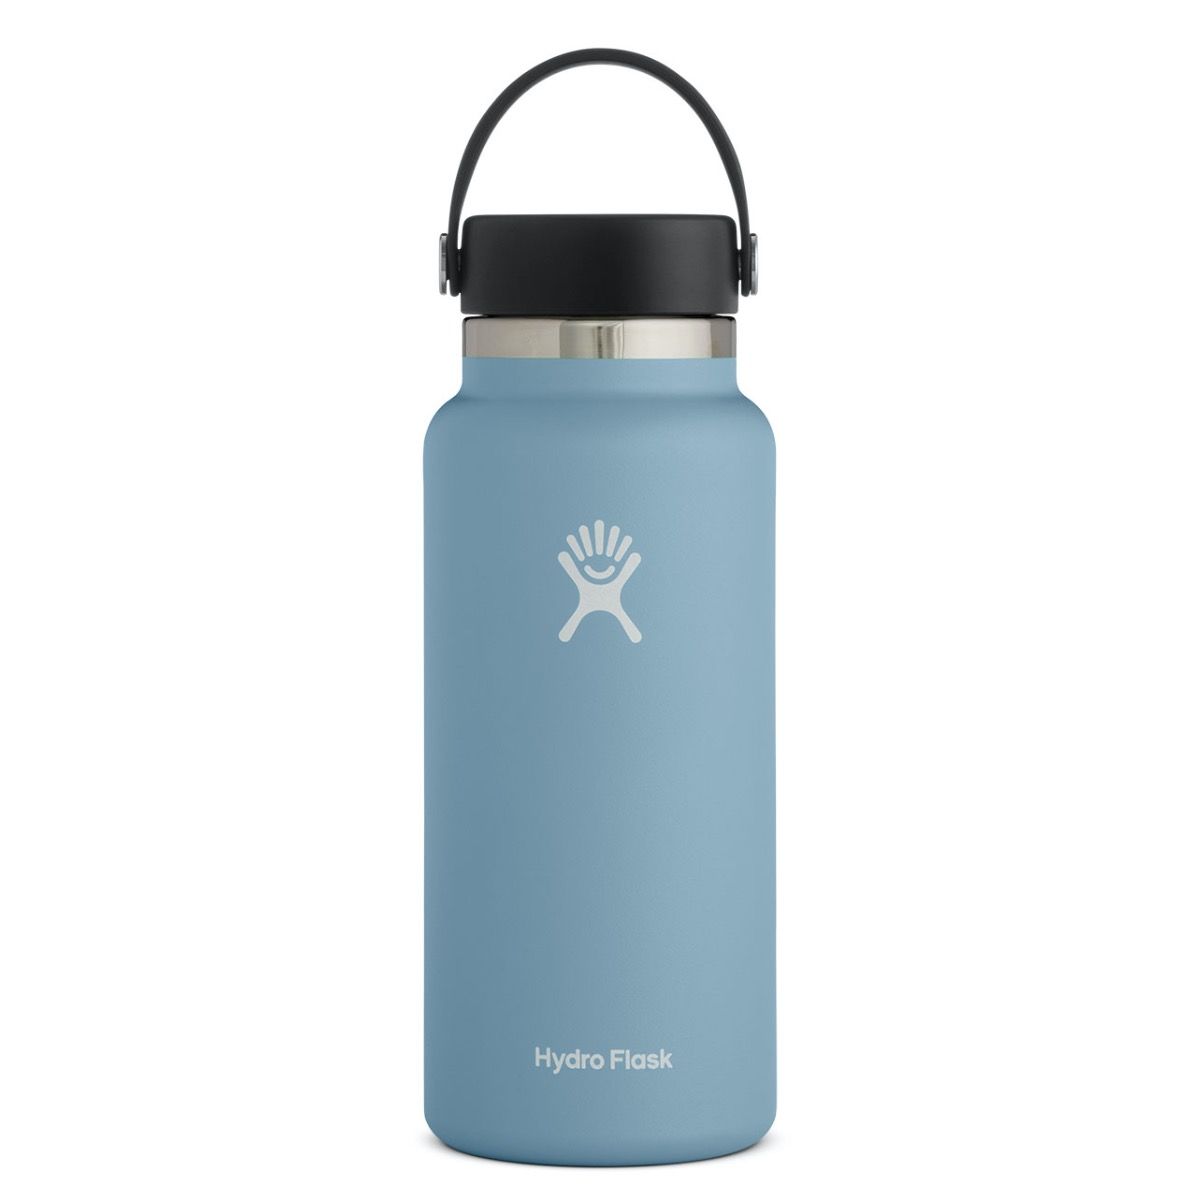 Hydro Flask Insulated Bottle Hydro Flask Wide Mouth 32 oz Water Bottle